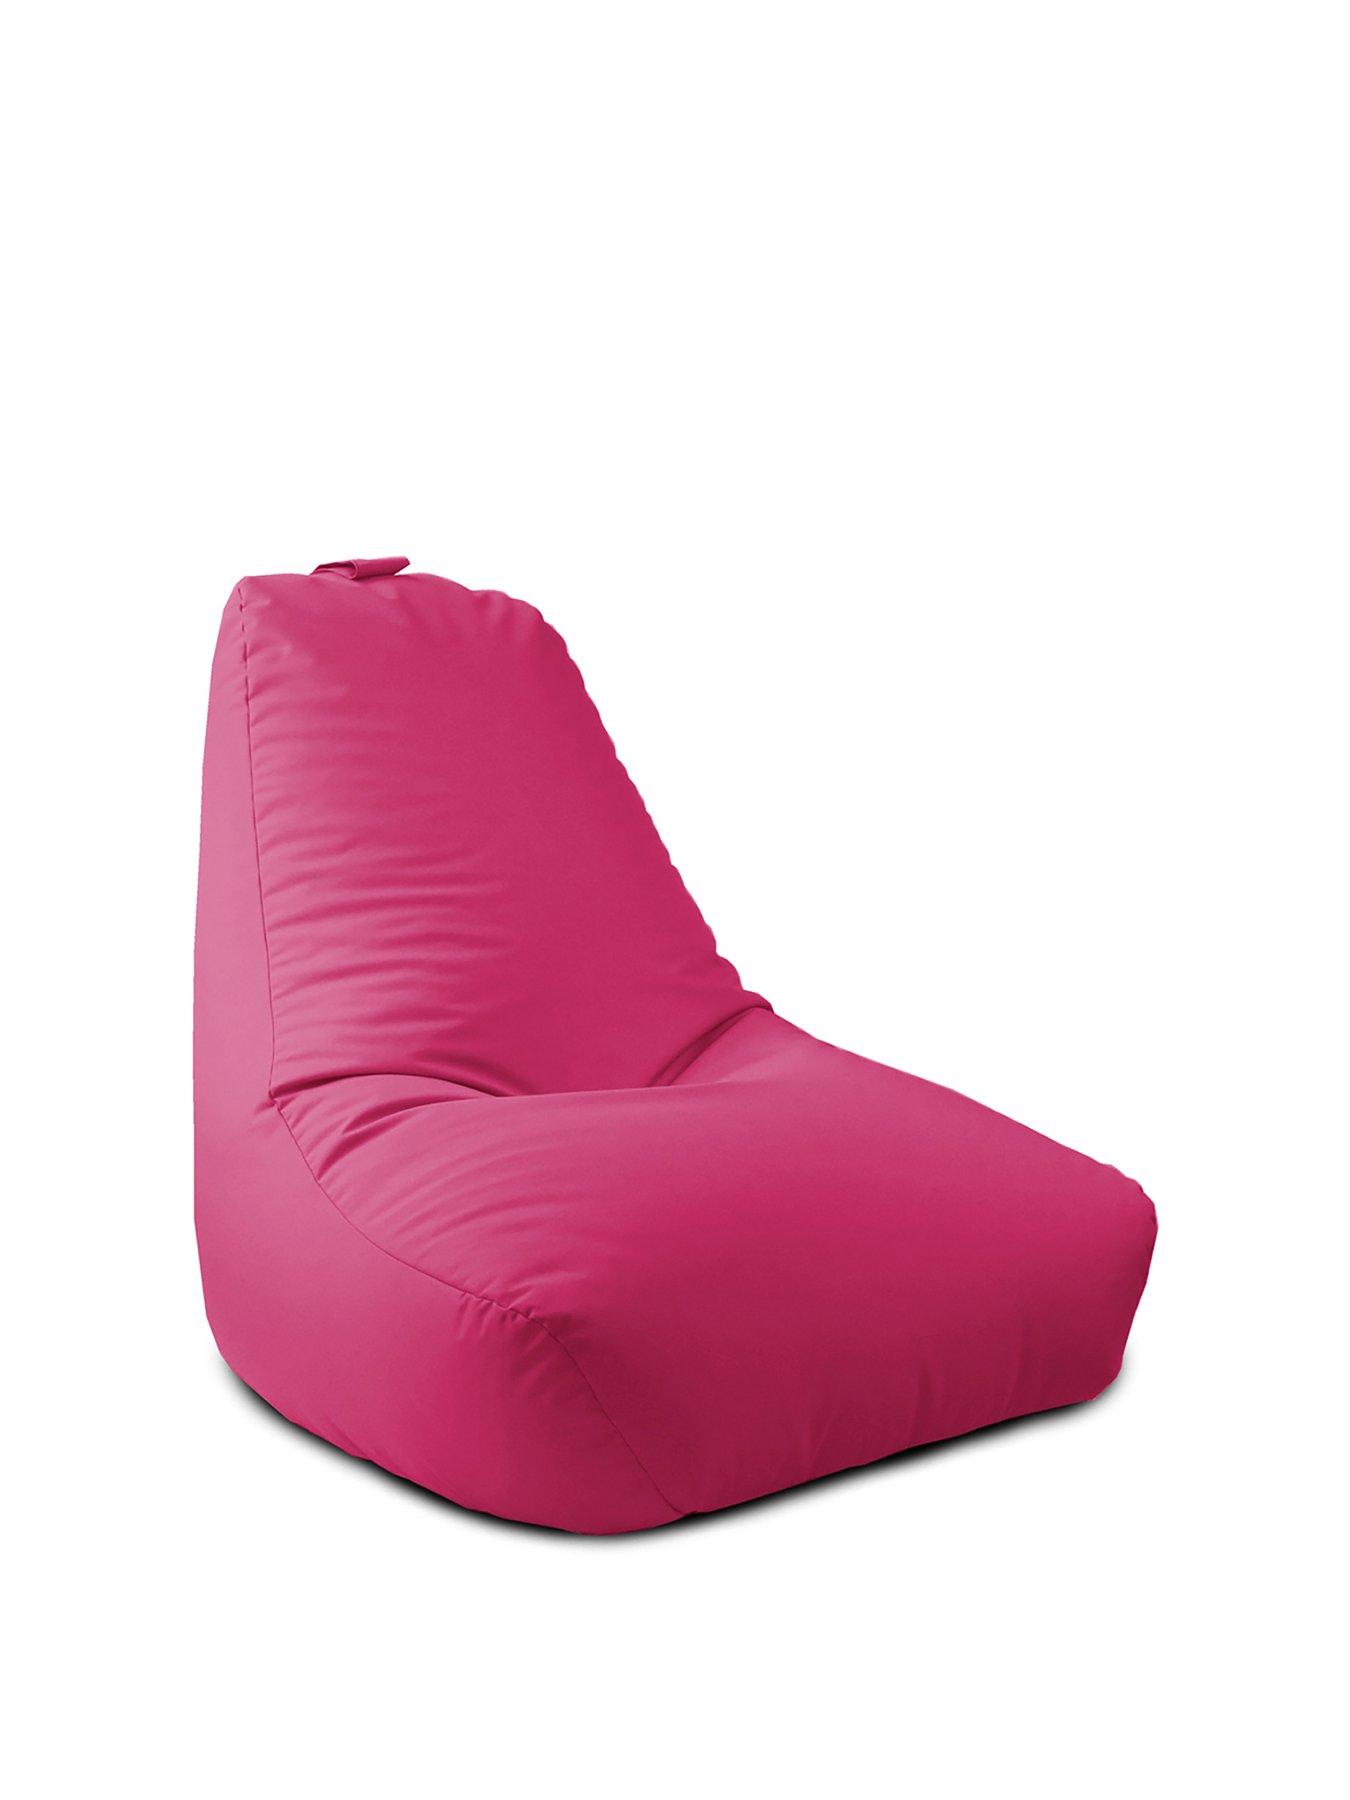 Details about   Extra Large Inflatable Bean Bag Sofa Indoor Outdoor Chair Seat Lounge Footstool 